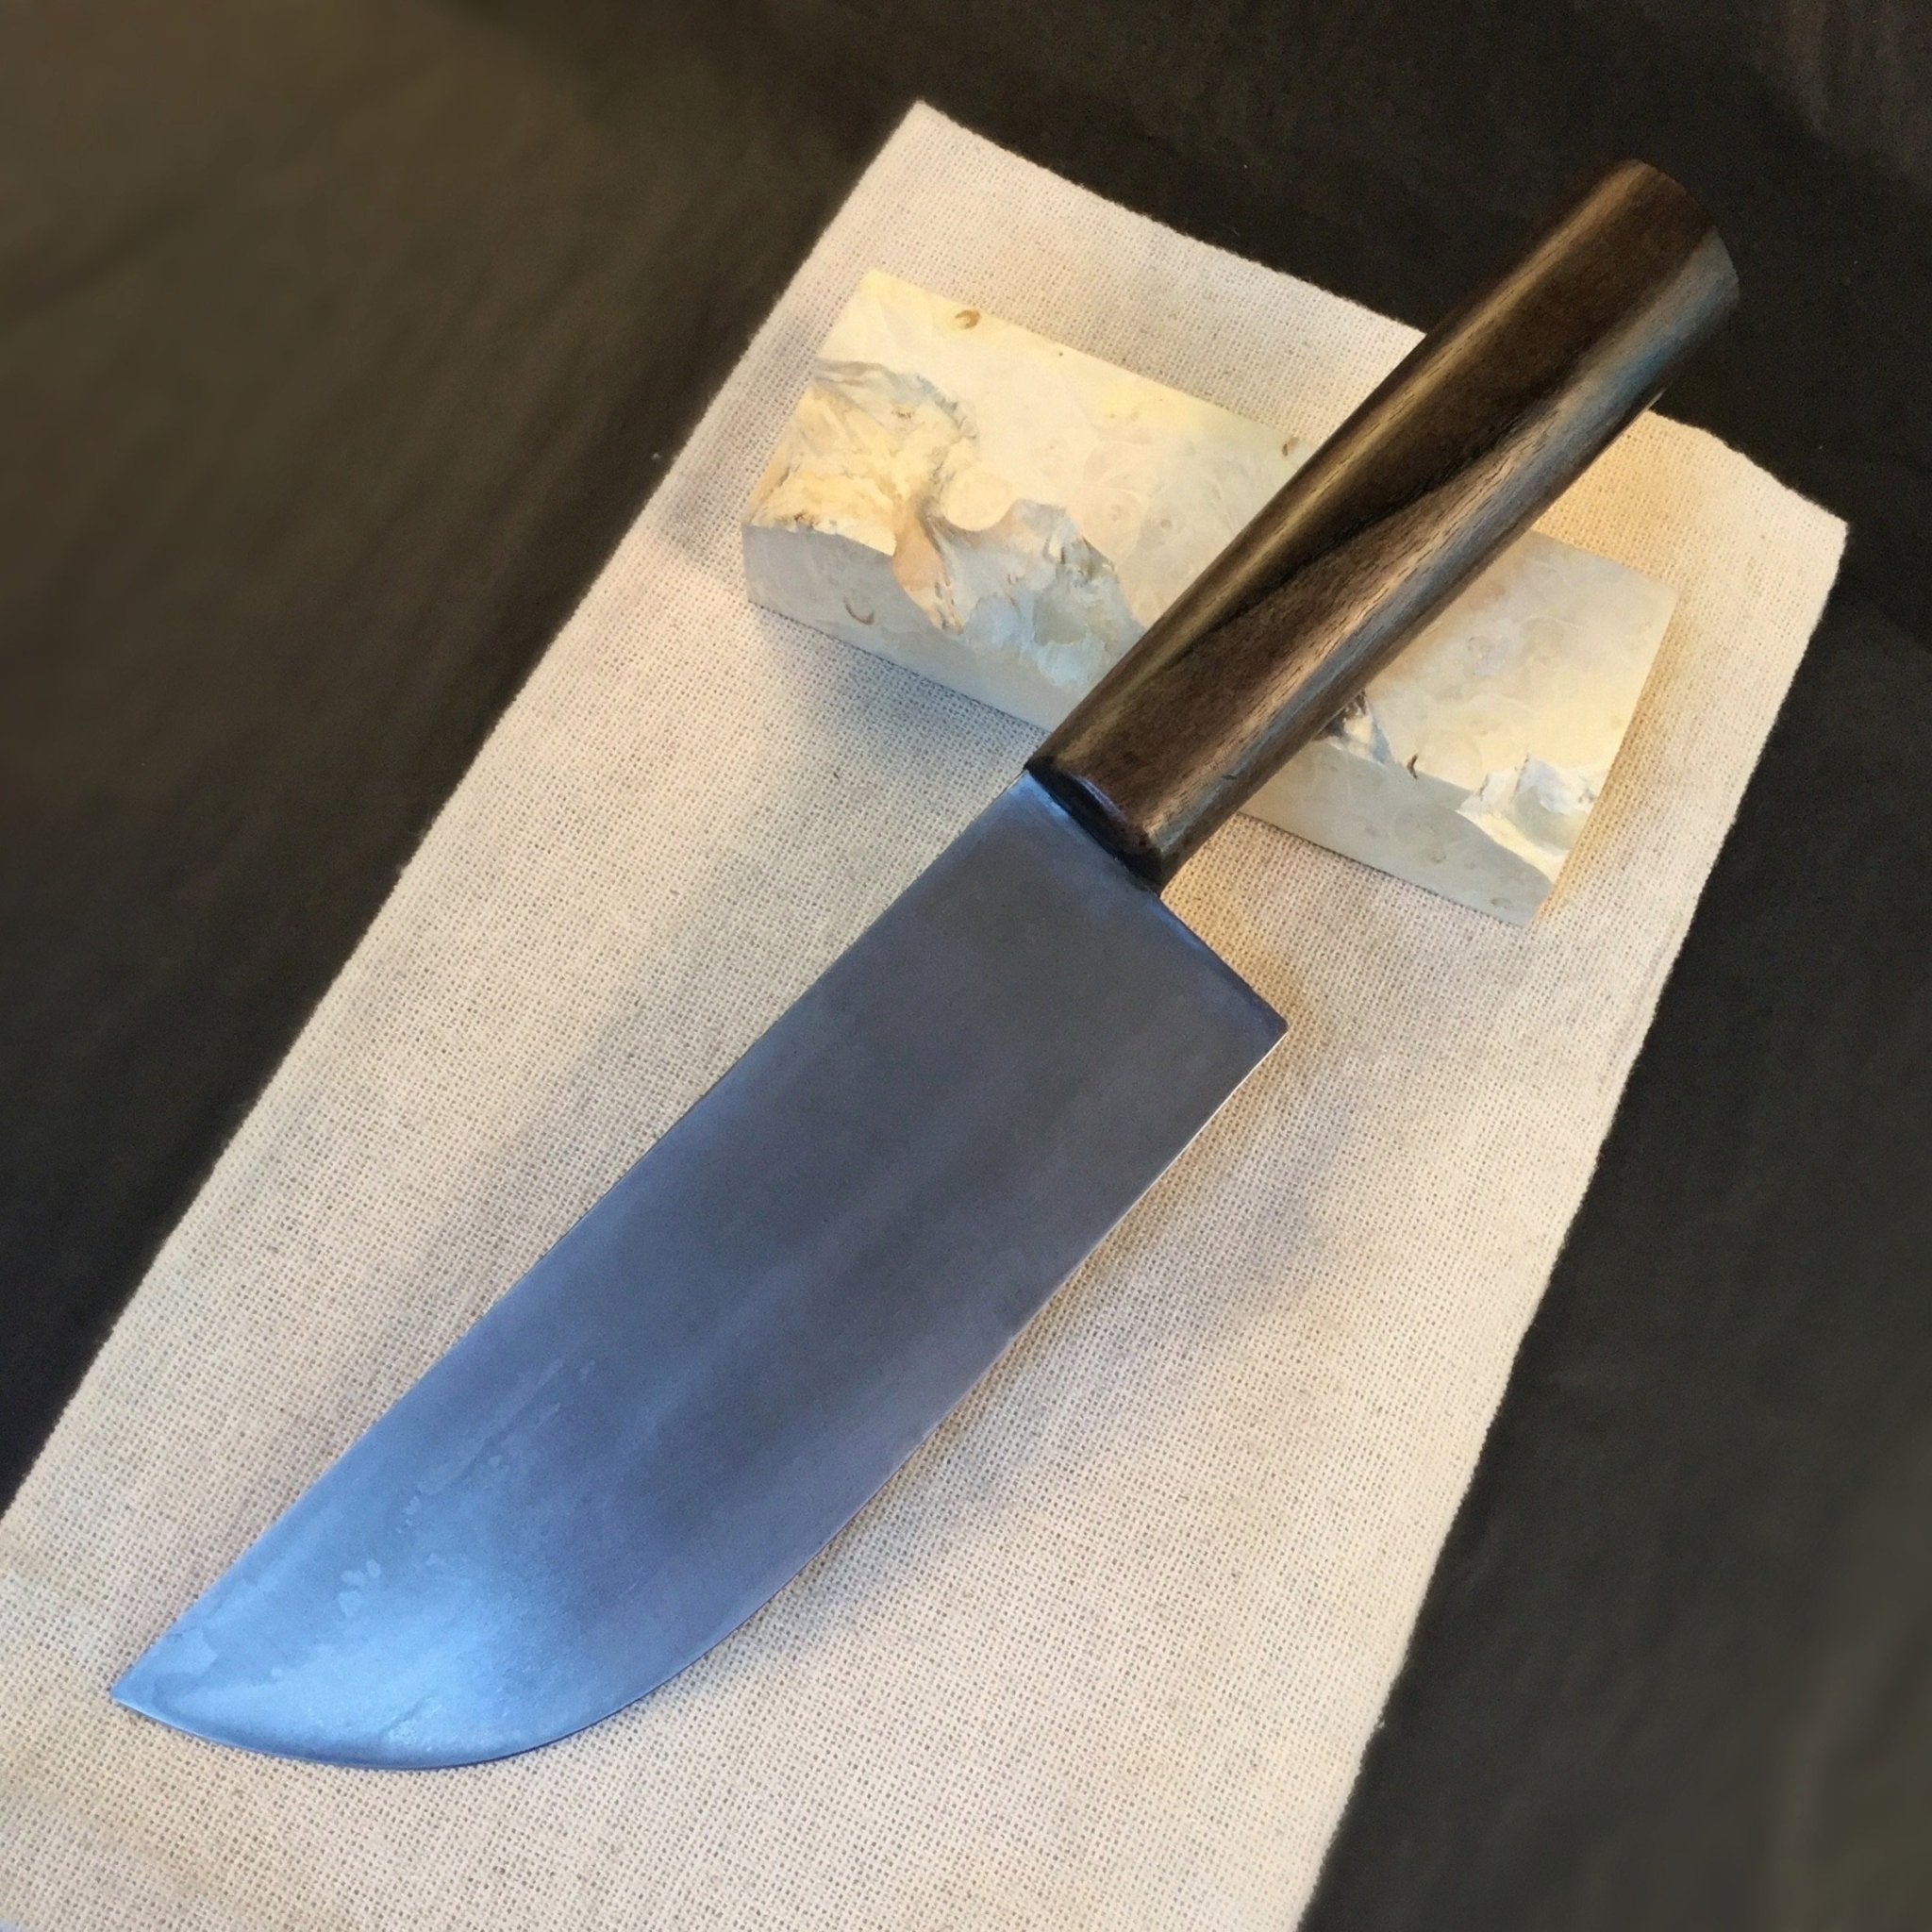 Kitchen Knife Chef, Stainless Steel, Completely in only one copy!